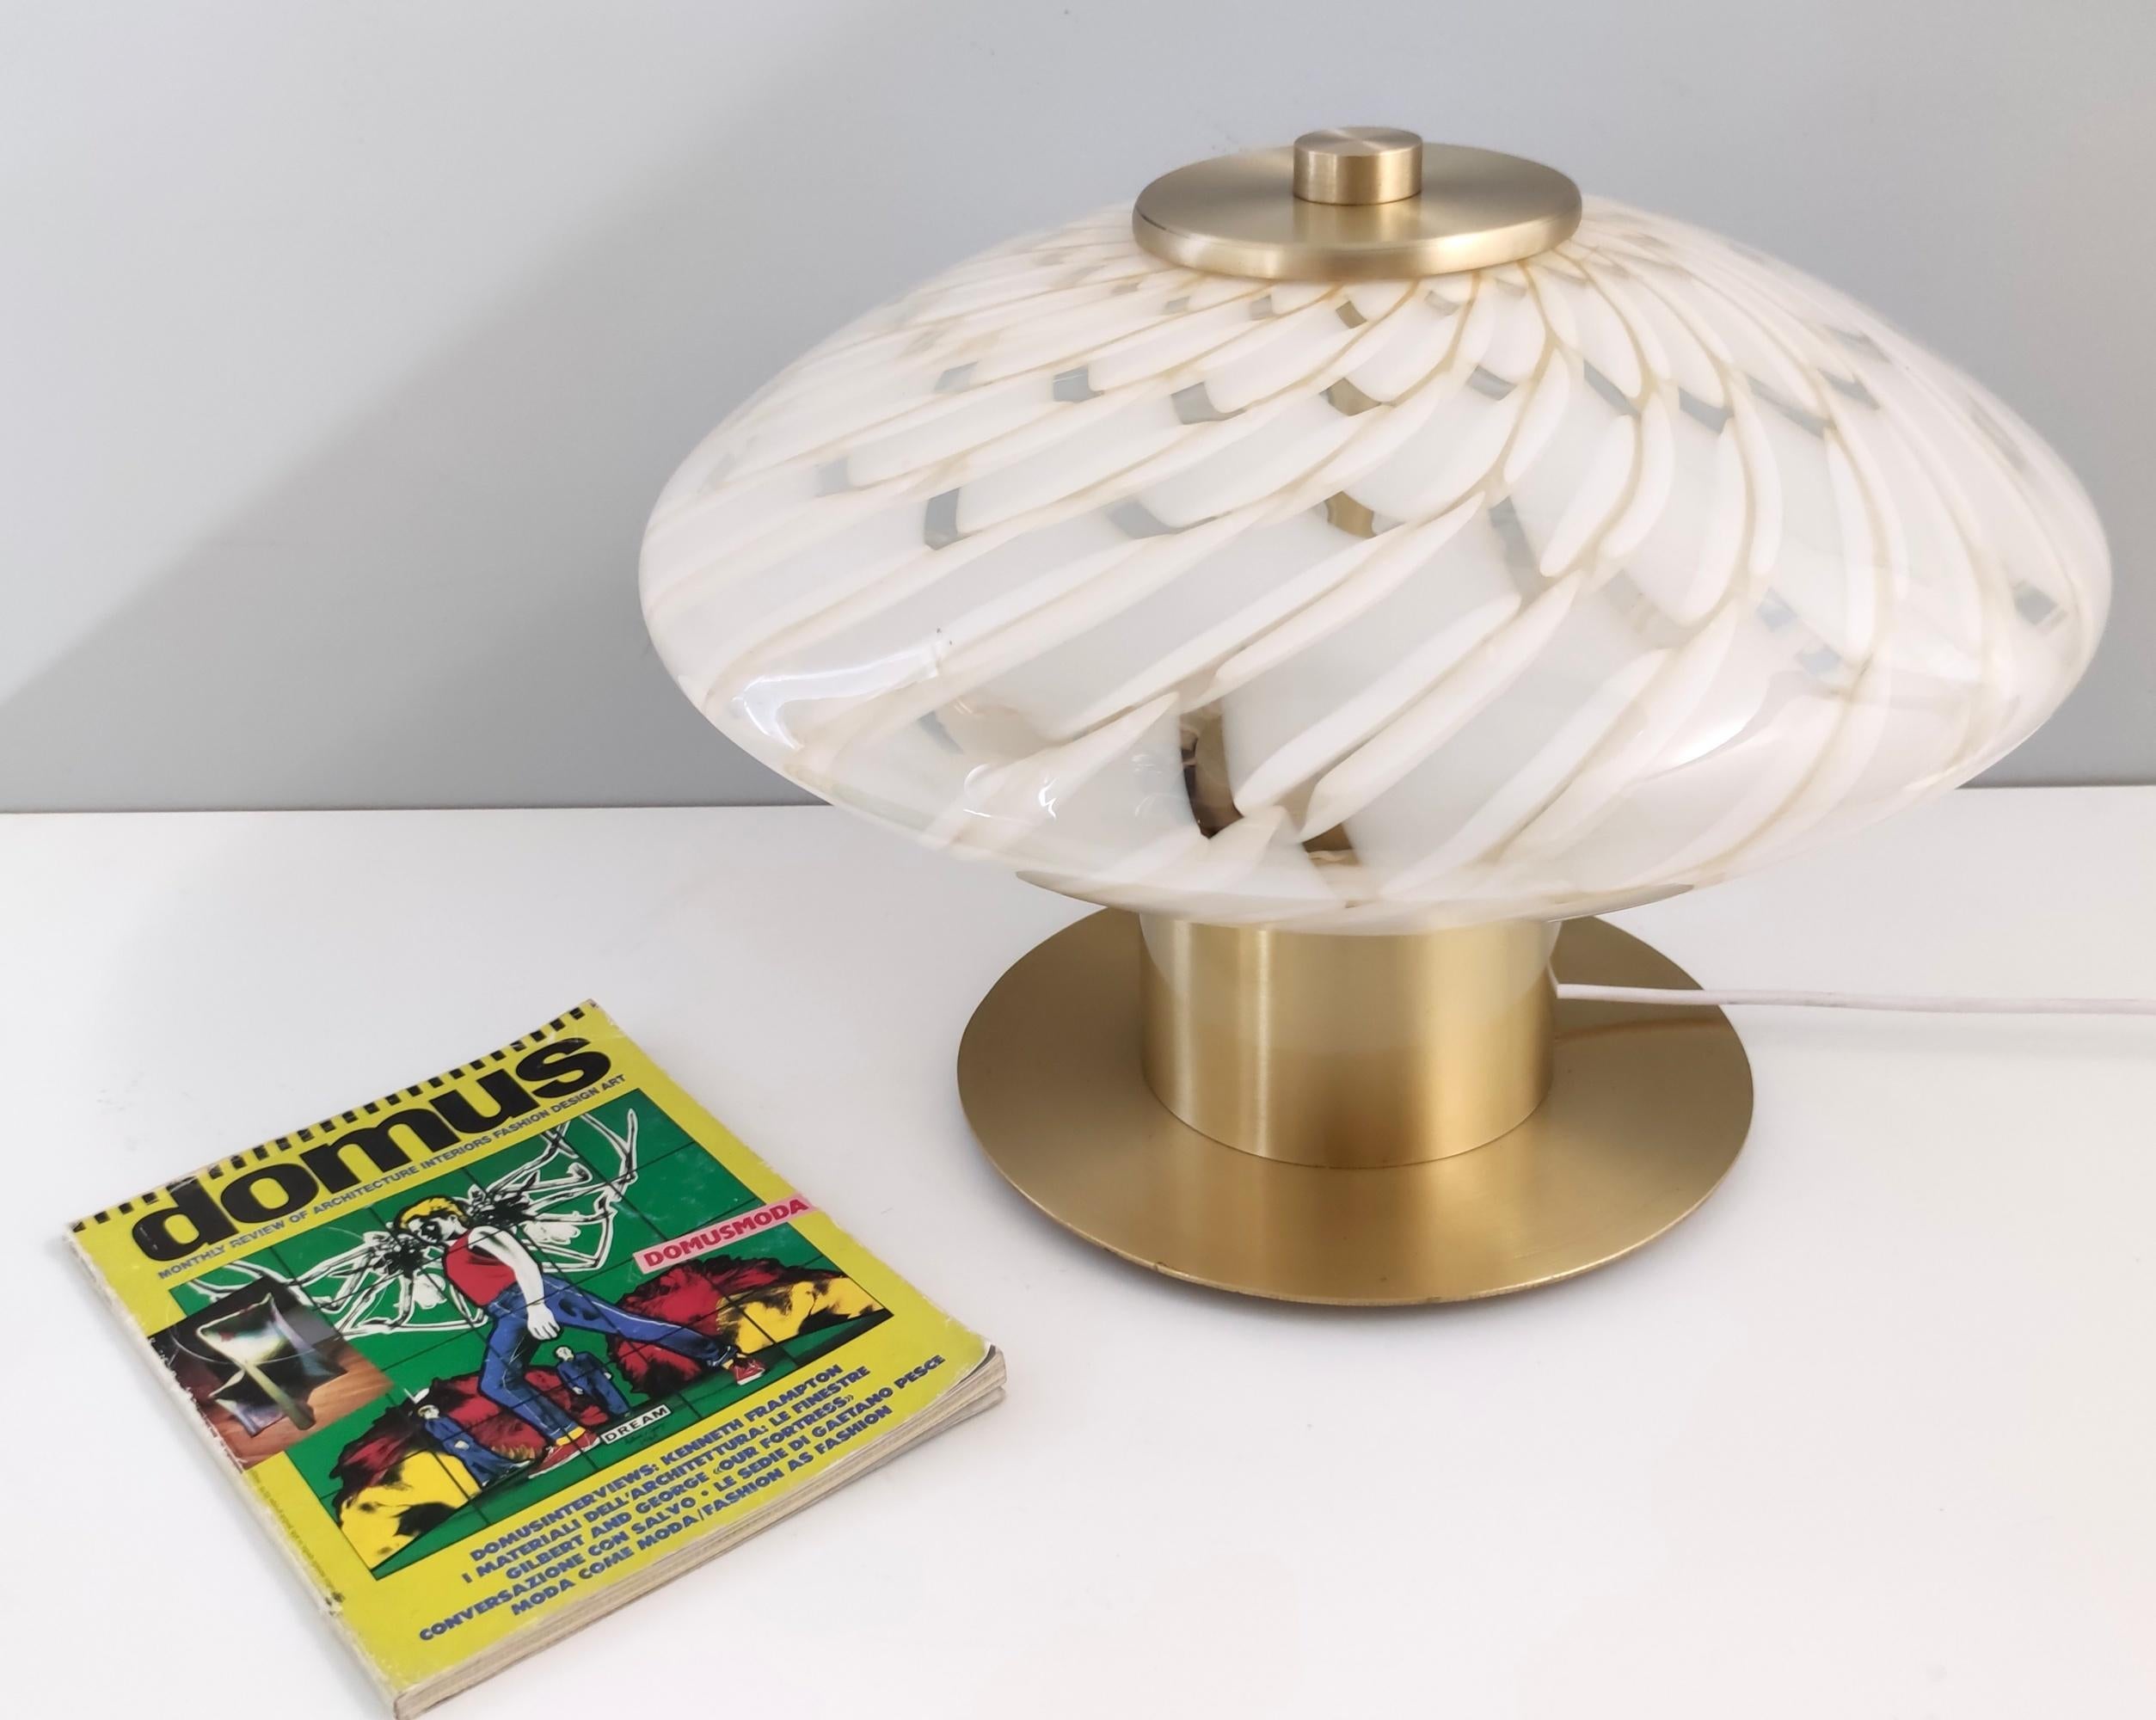 Made in Italy, 1980s. 
This table lamp is made in Murano glass and brass.
It is a vintage piece, therefore it might show slight traces of use, but it can be considered as in perfect original condition and ready to give ambiance to any room.